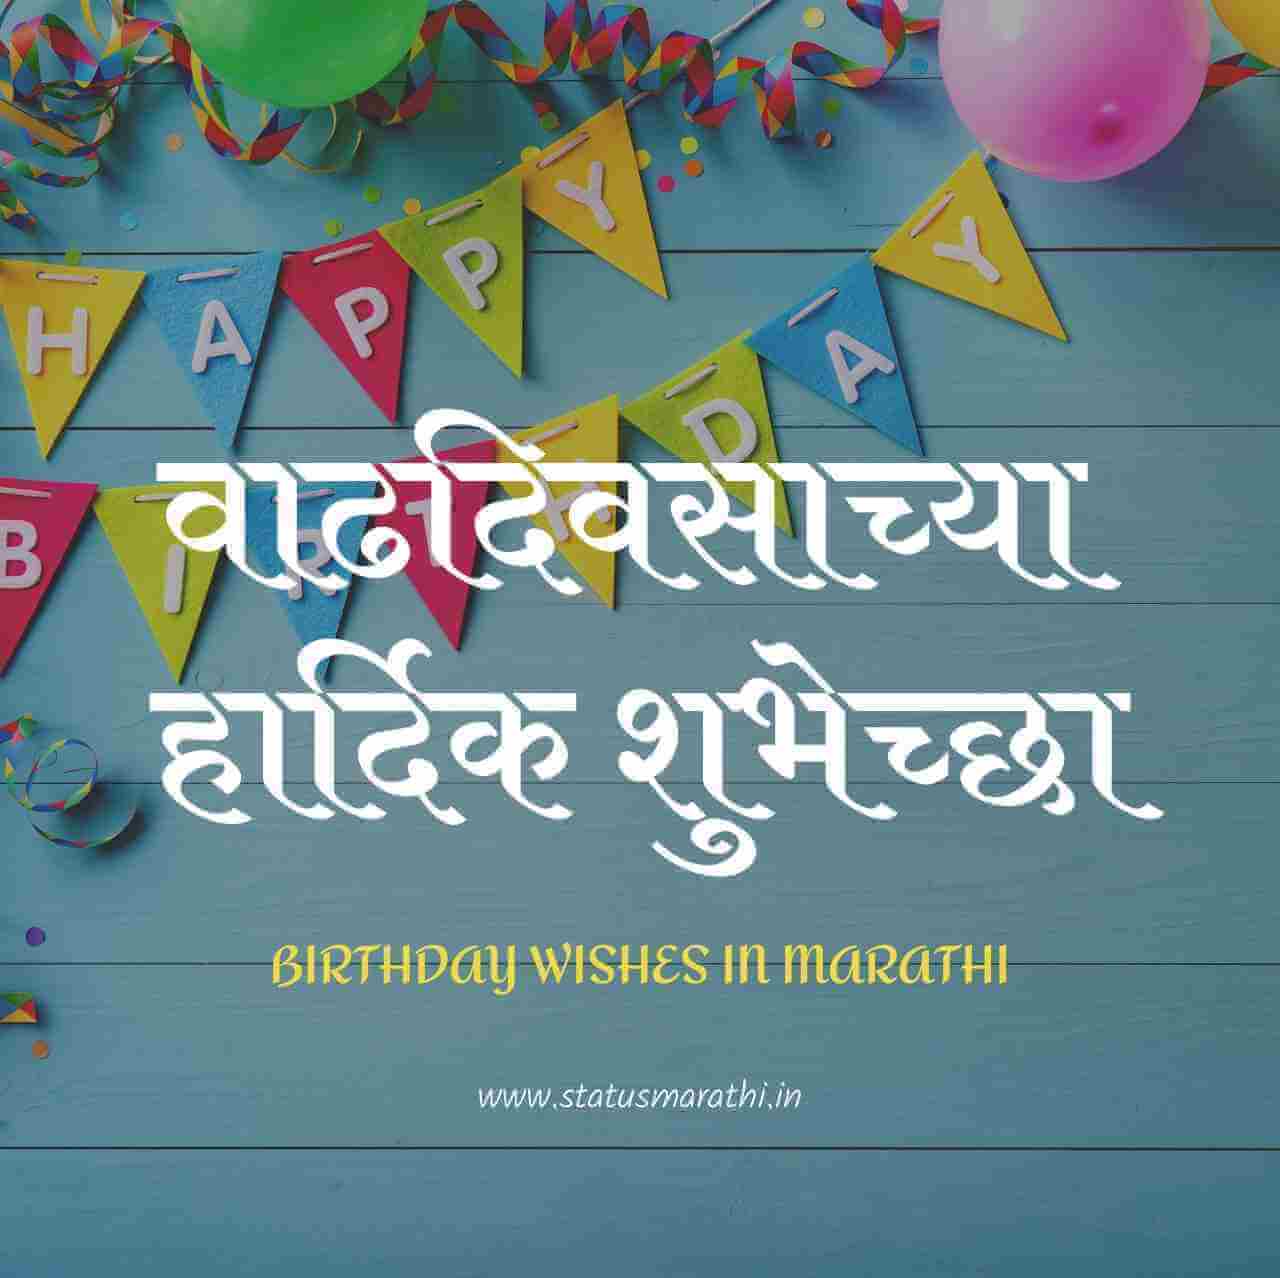 100 Happy Birthday Wishes in Marathi For Friends and Family